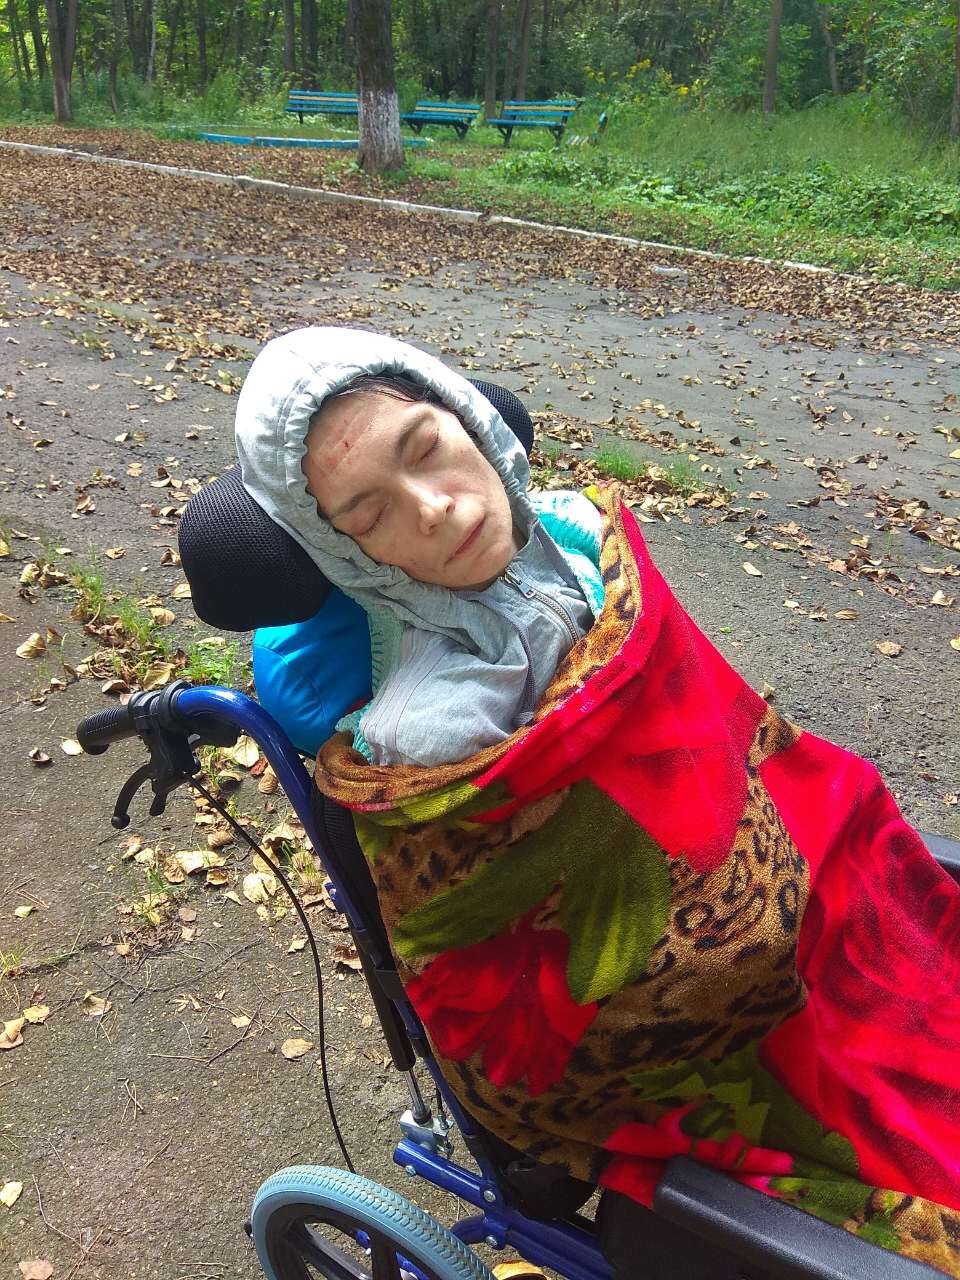 Vika, outside in the fresh air, in front of her rehabilitation facility. September 2018.